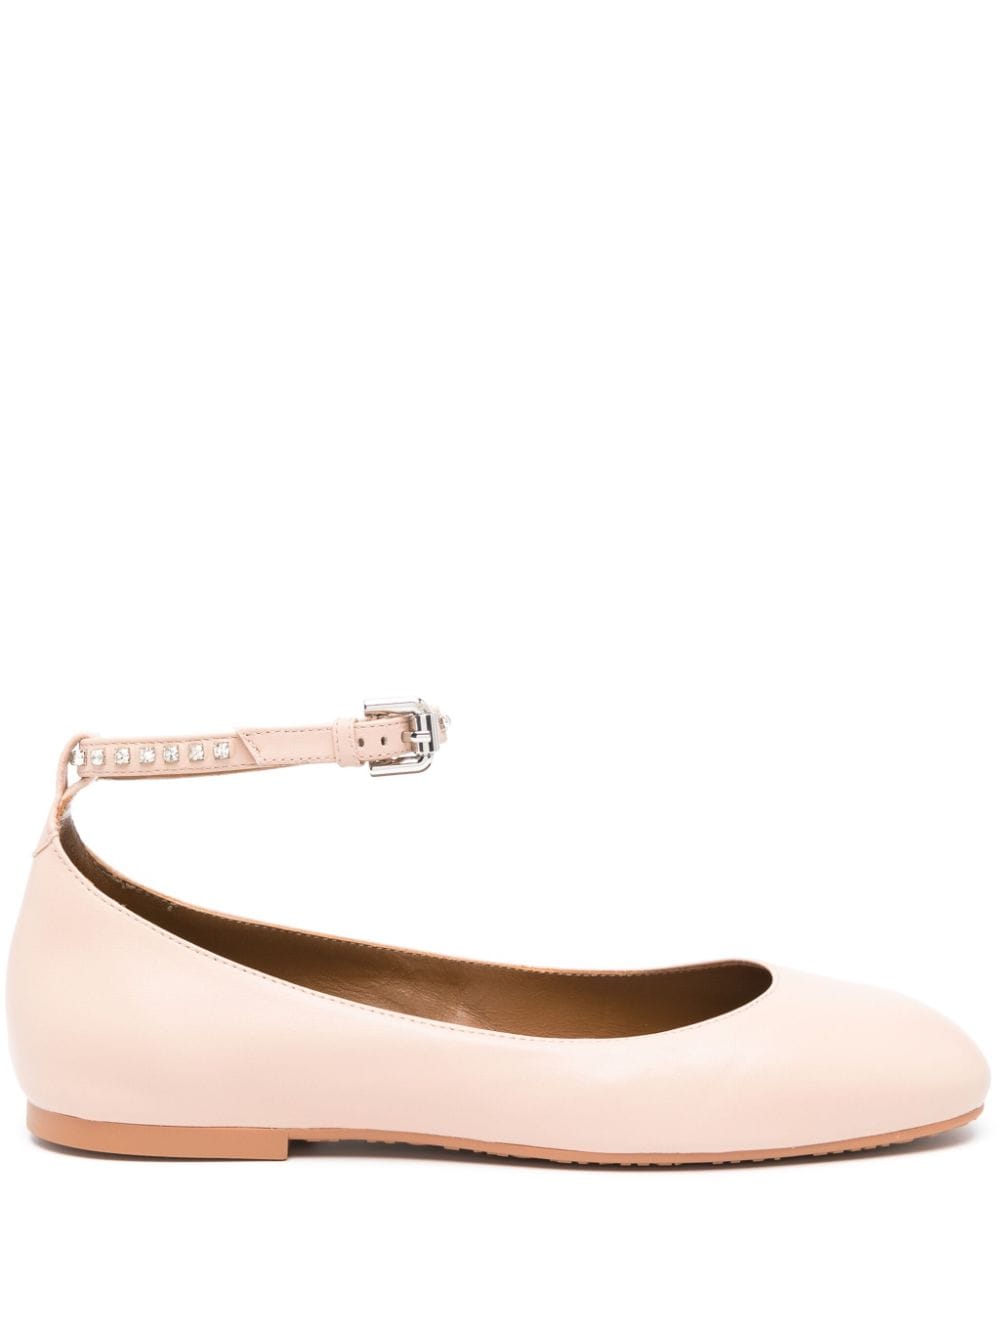 See by Chloé rhinestone-embellished ballerina shoes - Pink von See by Chloé